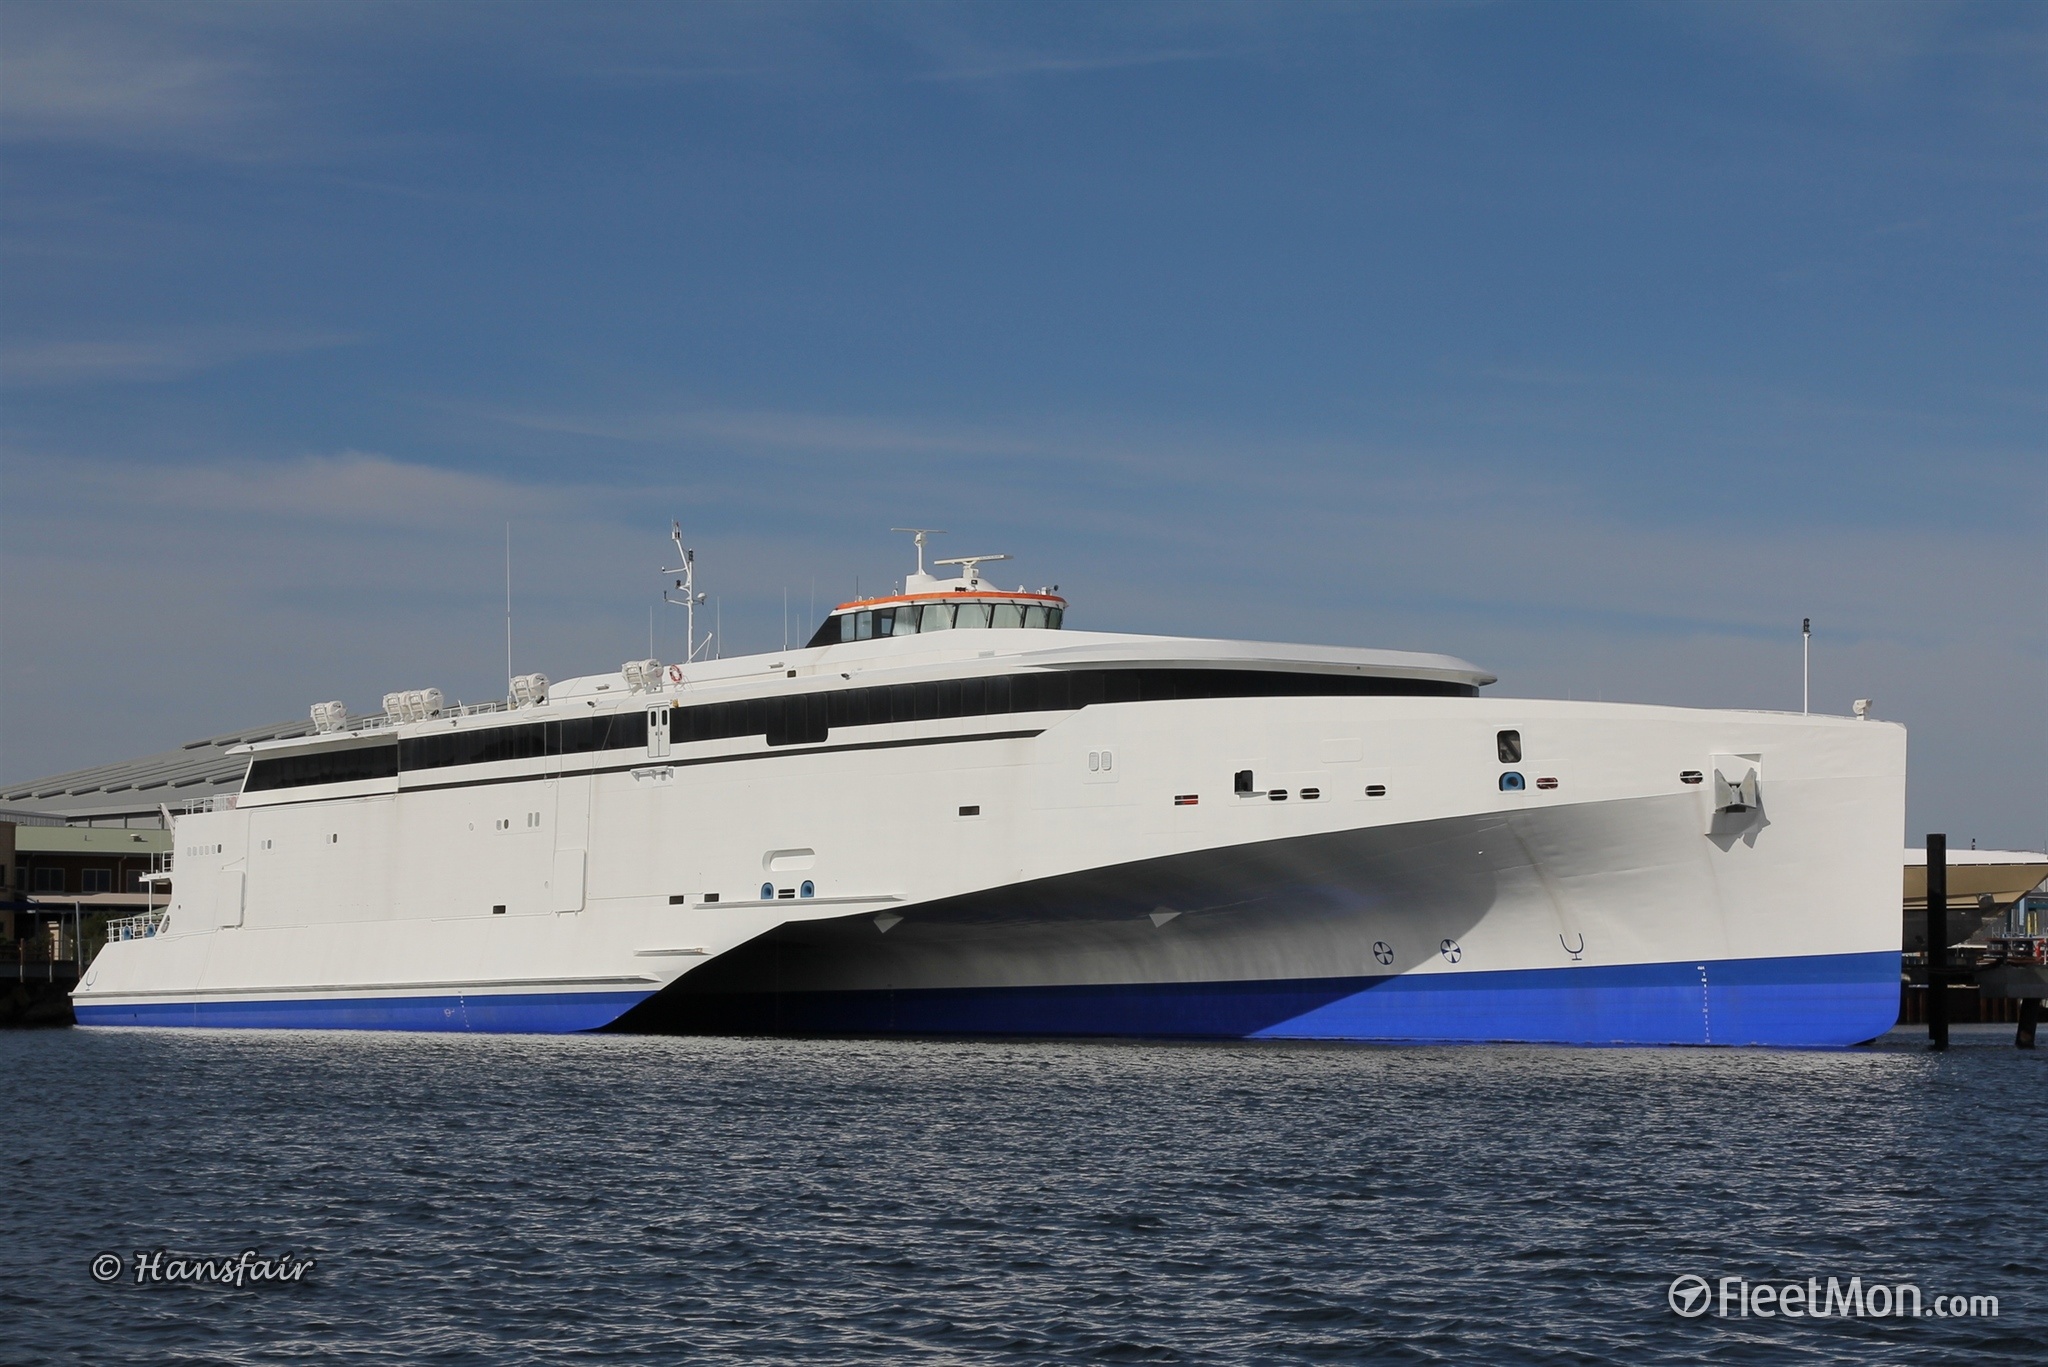 Embarrassing start for new Condor fast ferry